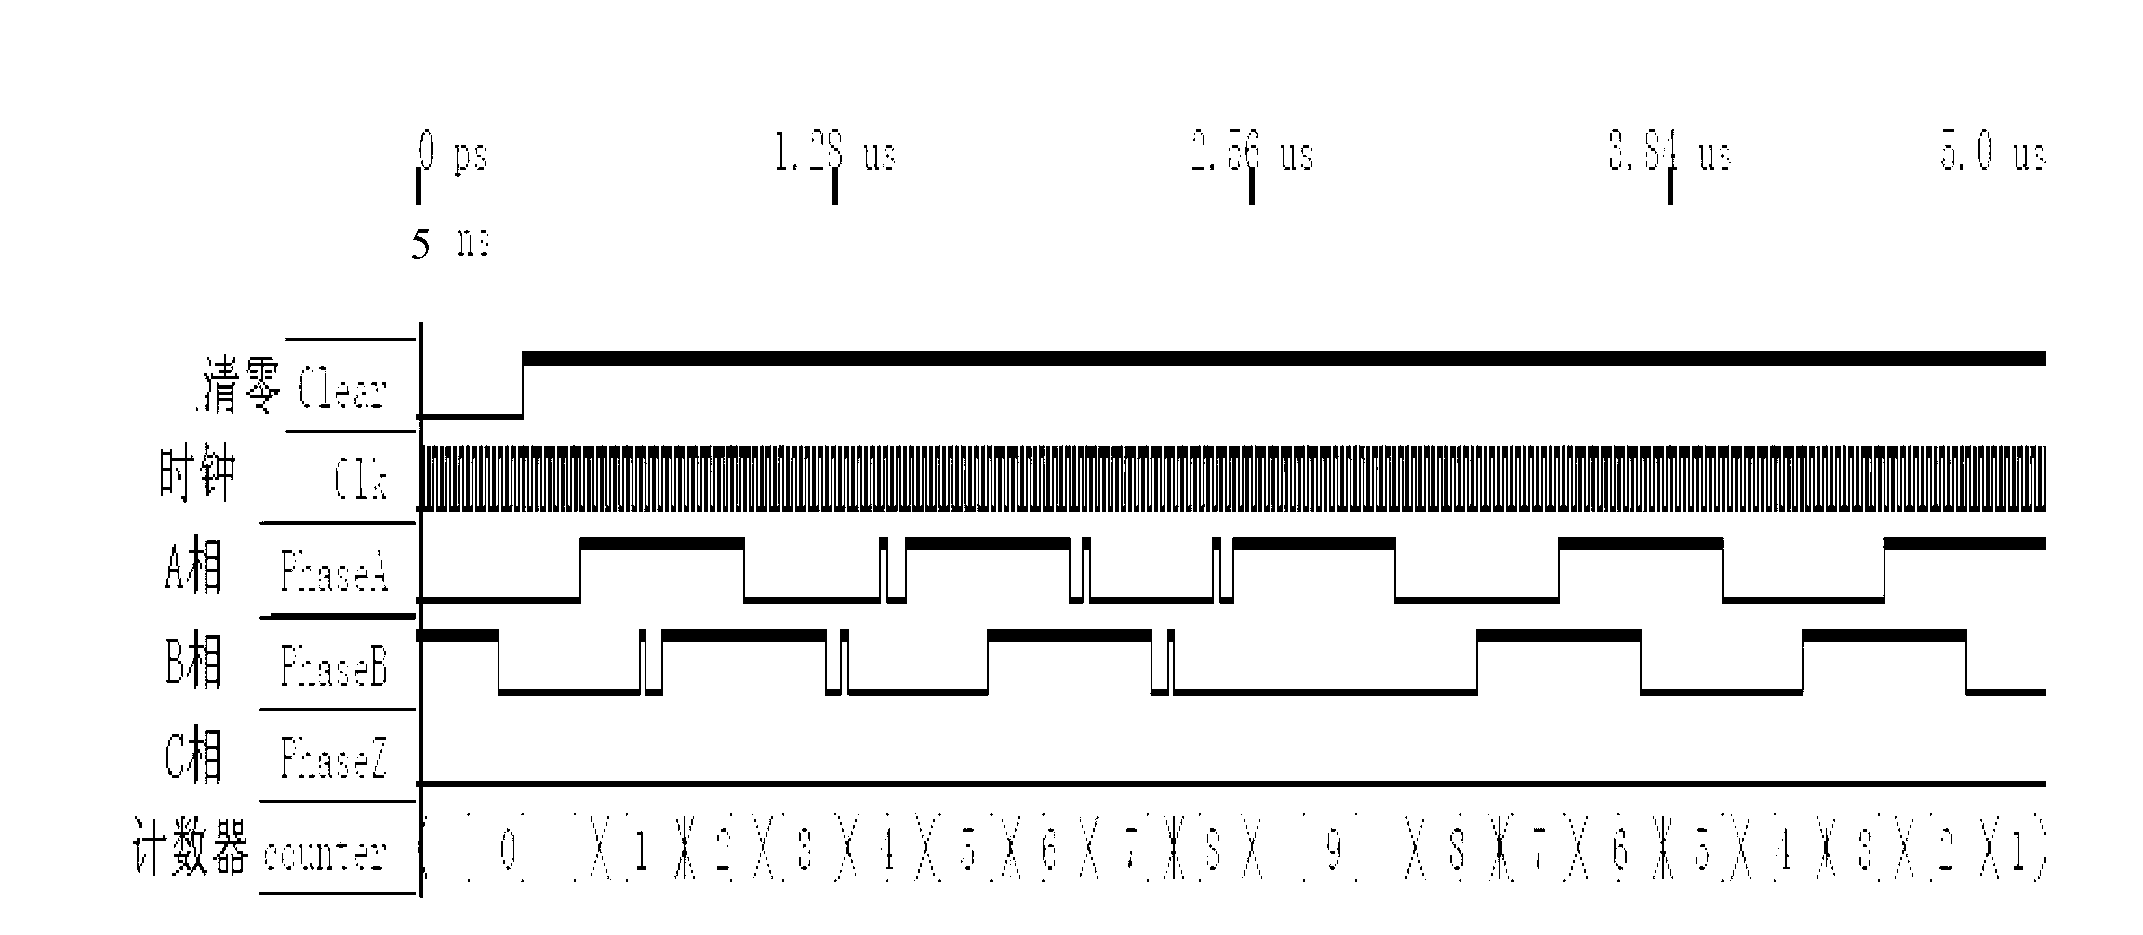 Orthogonal signal quadruplicated frequency counting method with filter function